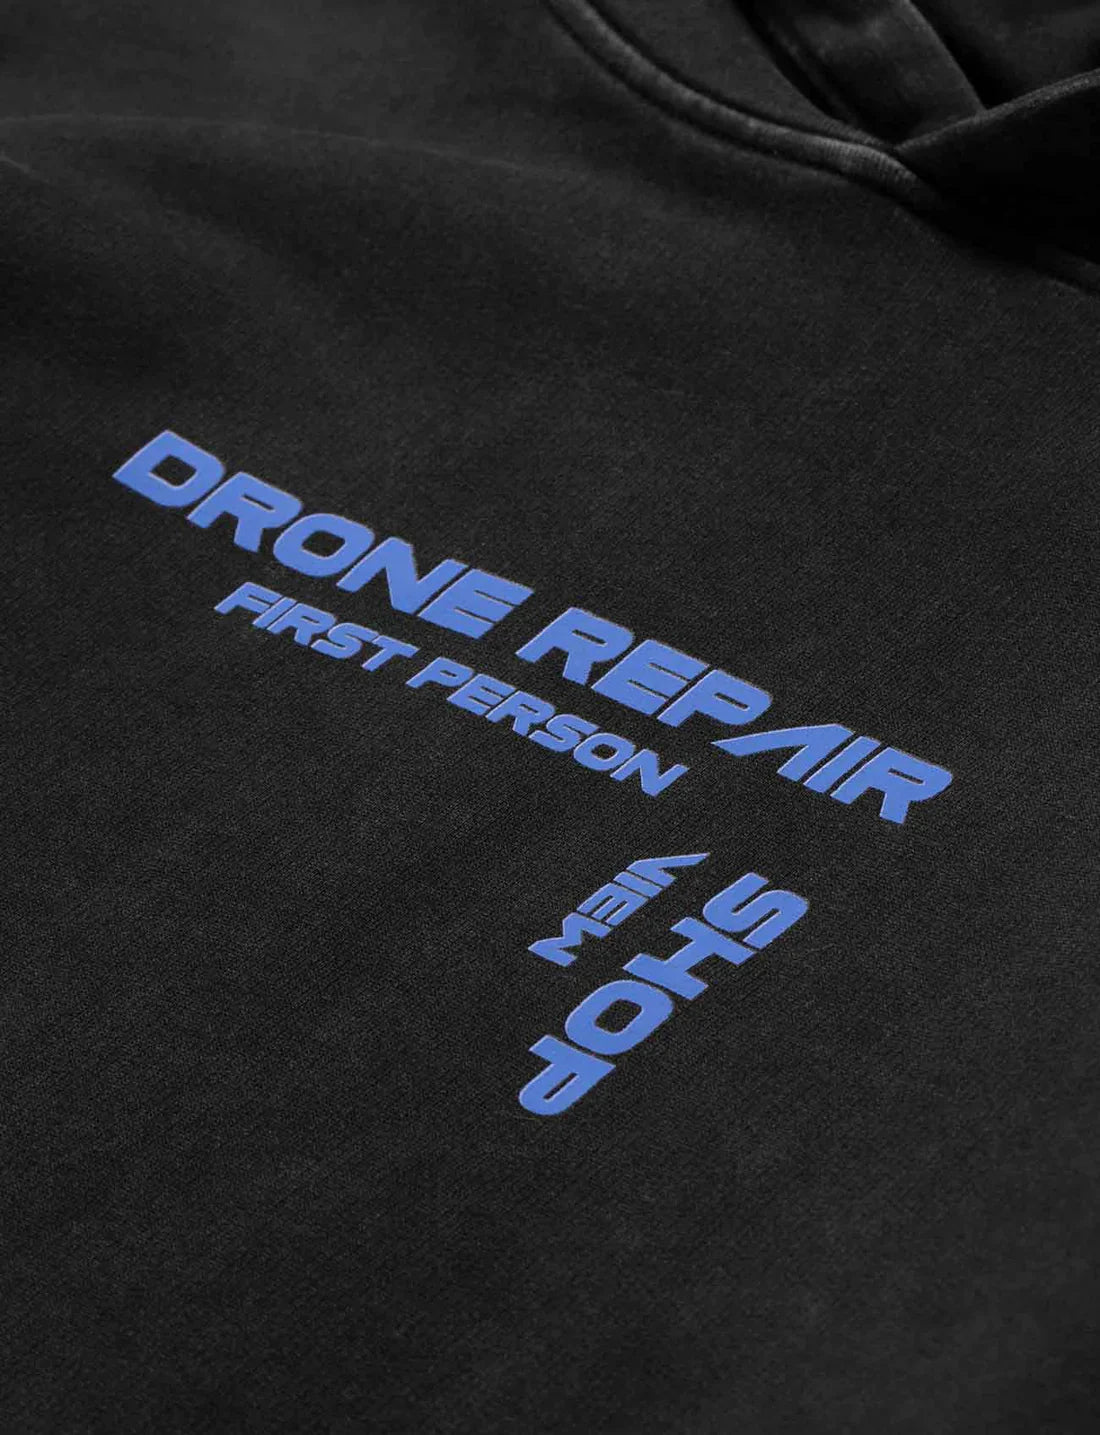 Zoomed-in view of the Drone Repair Shop Hoodie's chest area, displaying the blue 'DRONE REPAIR FIRST PERSON SHOP' text, emphasizing the specialized theme of the hoodie.